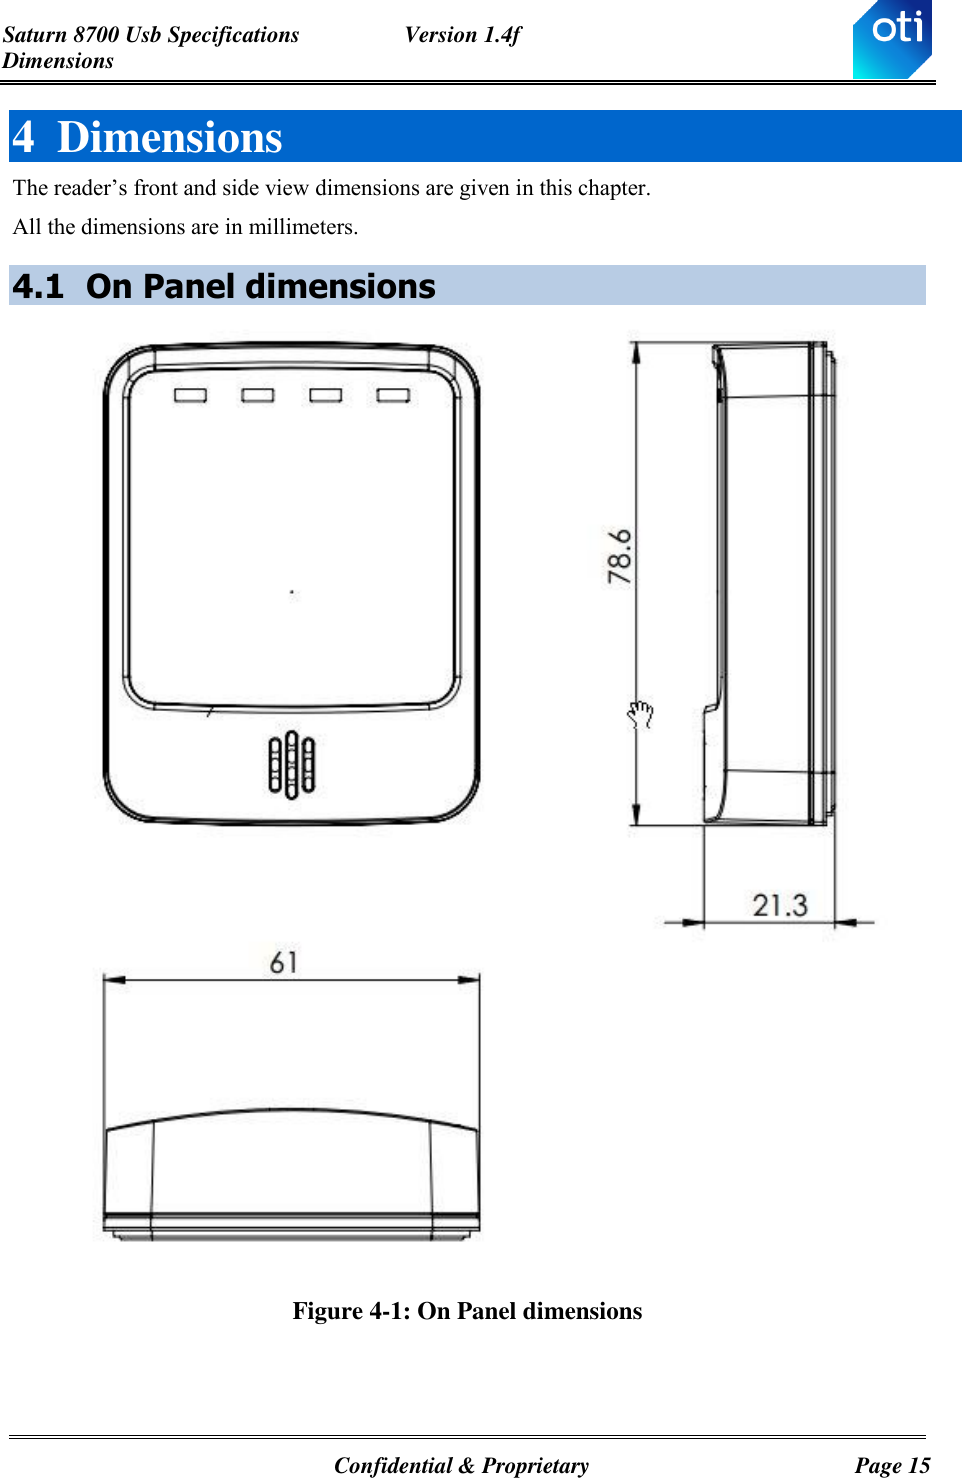 Saturn 8700 Usb Specifications  Version 1.4f Dimensions   Confidential &amp; Proprietary  Page 15 4 Dimensions The reader’s front and side view dimensions are given in this chapter. All the dimensions are in millimeters. 4.1 On Panel dimensions  Figure 4-1: On Panel dimensions   